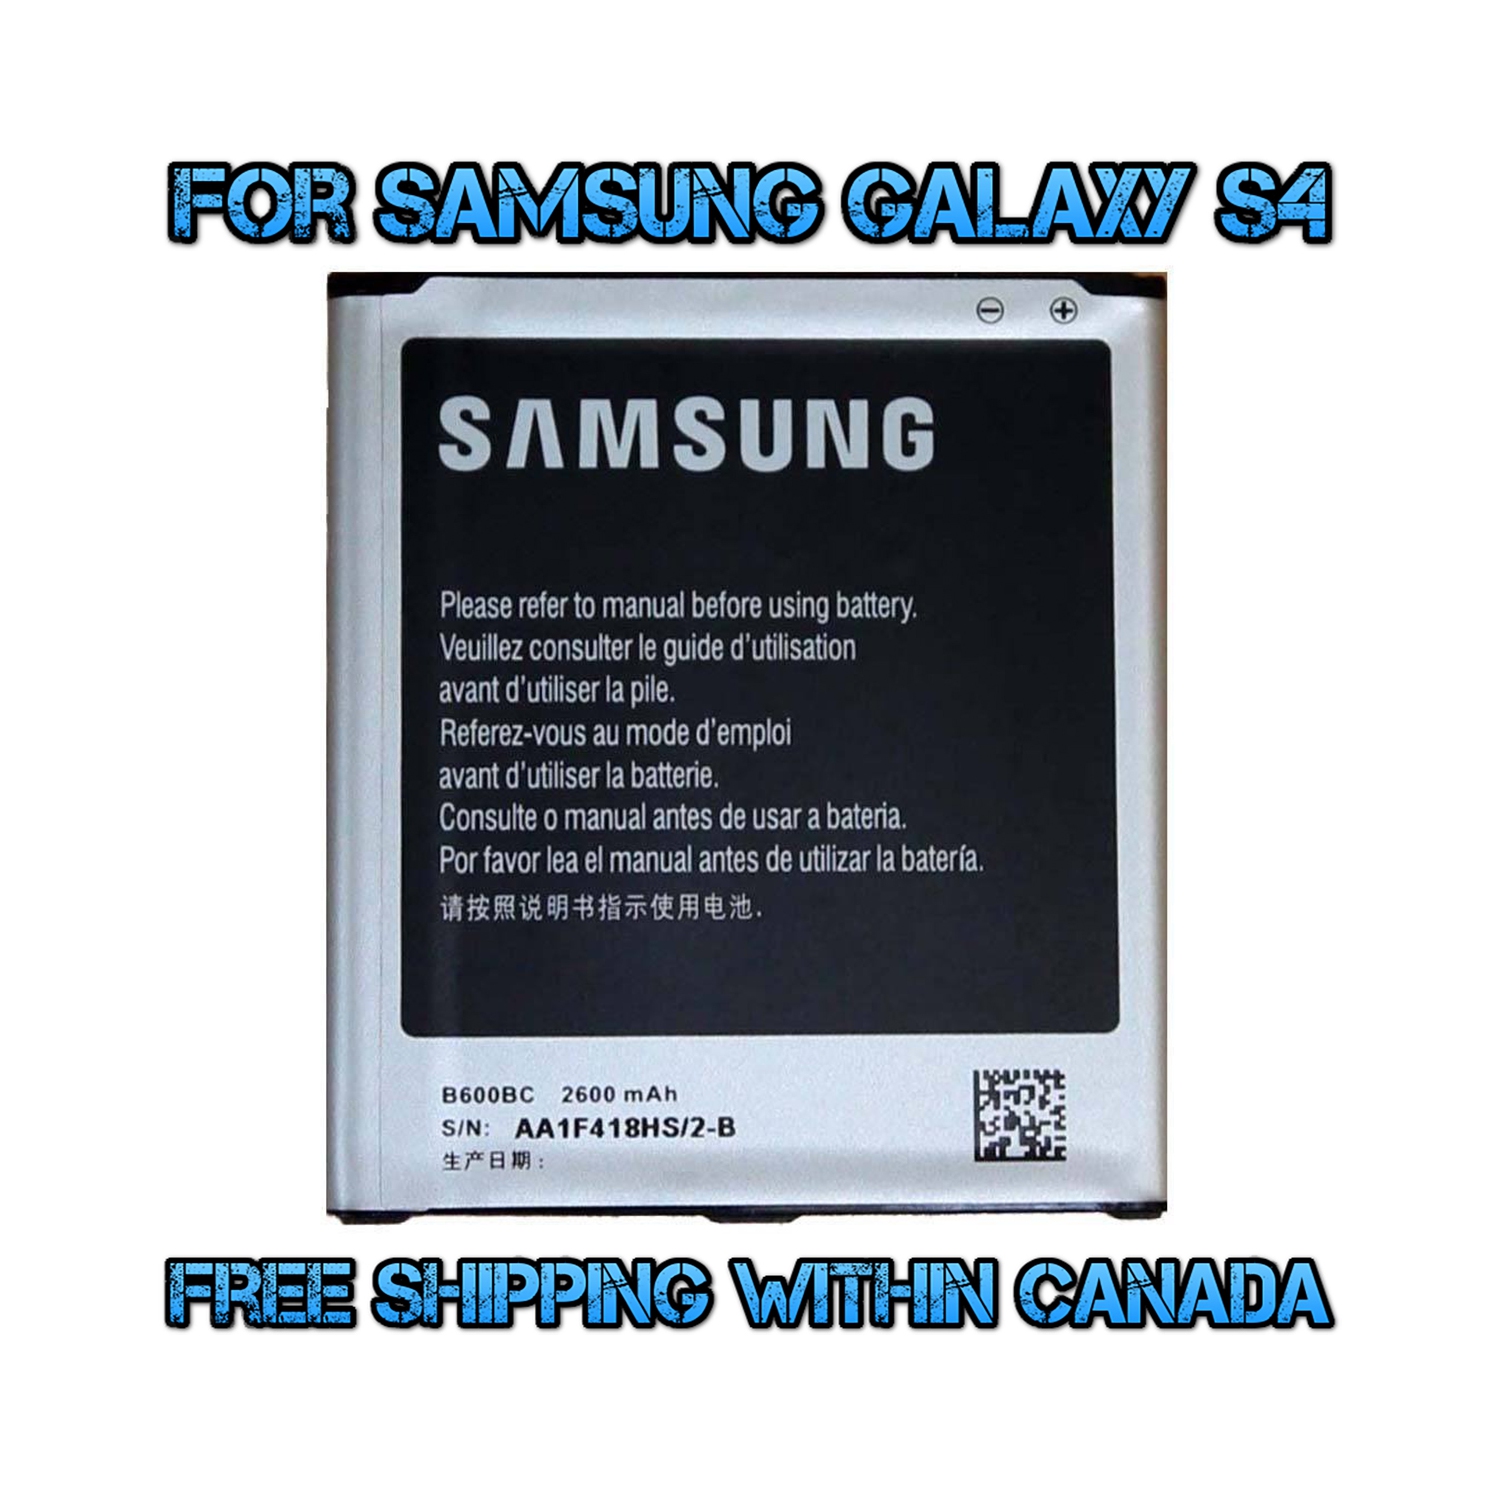 New OEM Replacement Battery Model B600BC 2600 mAh for Samsung Galaxy S4 i9500 SCH-i545 i337 - (FREE SHIPPING)